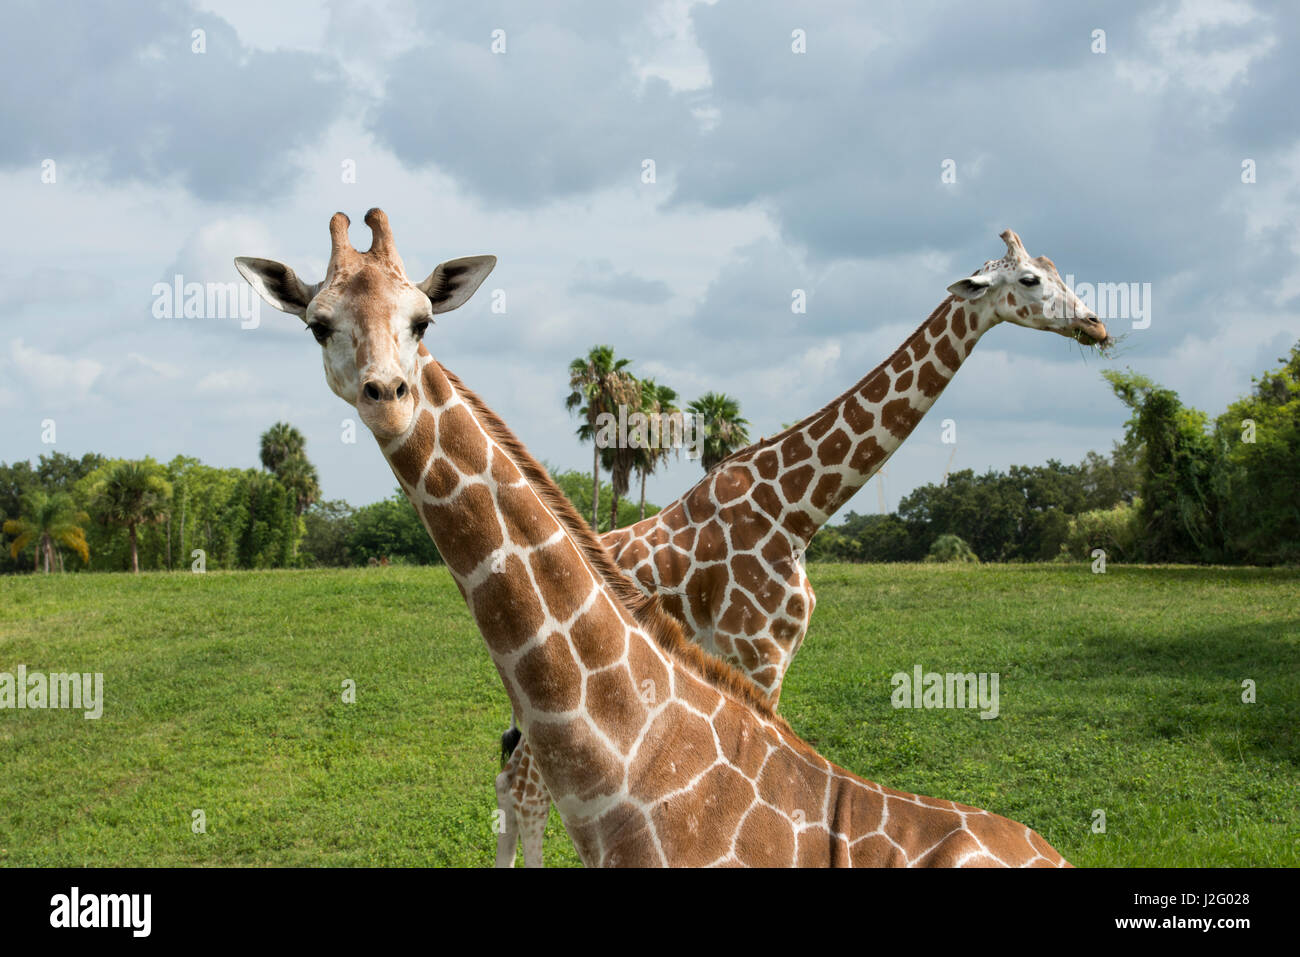 Two giraffes crossed, one looking at viewer and one with grass in mouth (Large format sizes available) Stock Photo